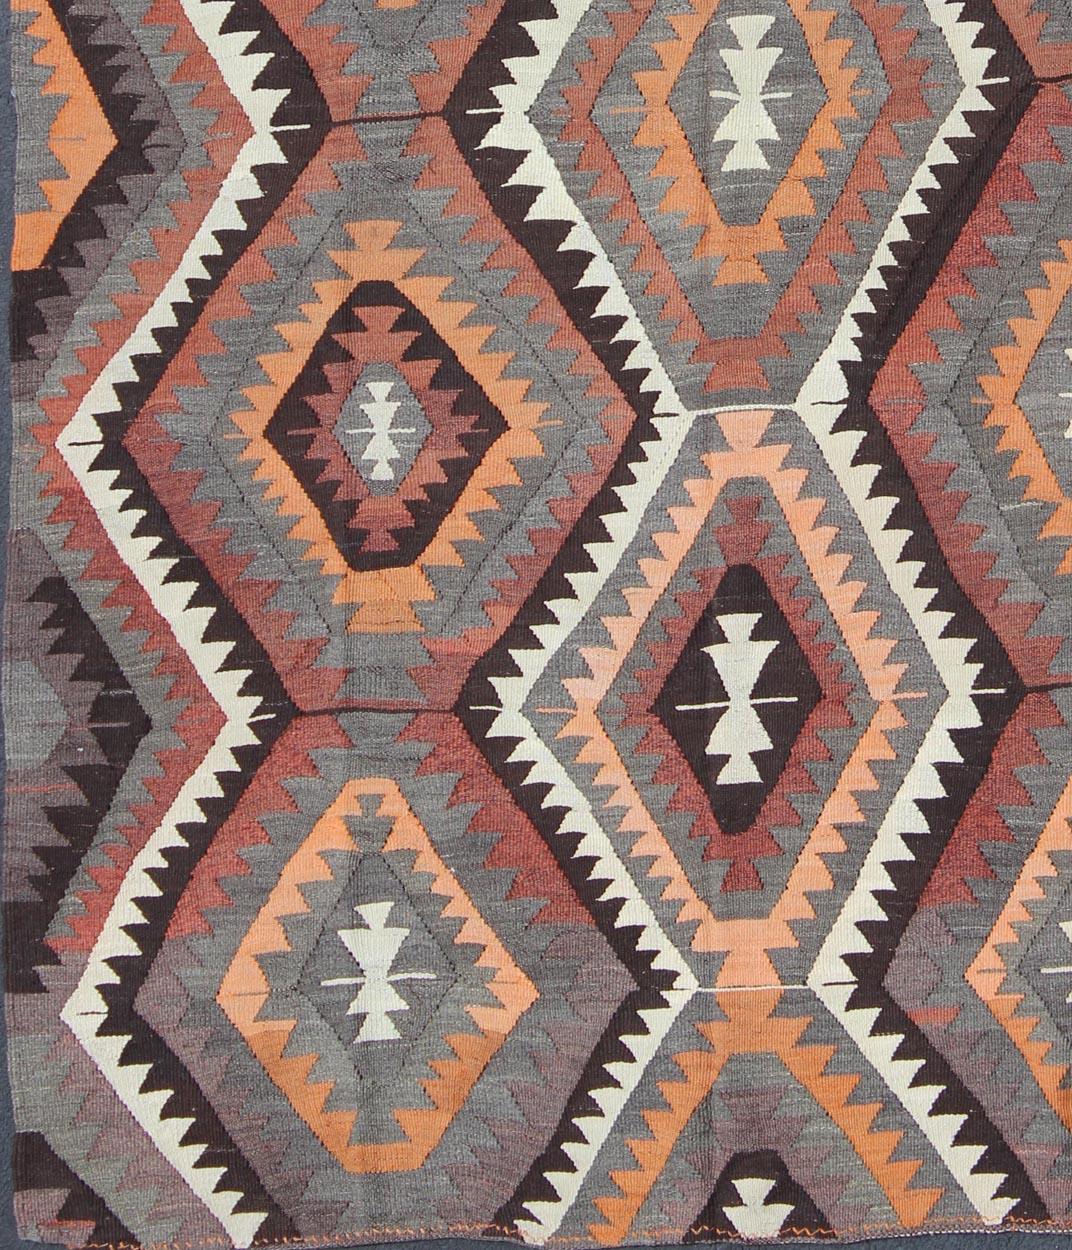 Bold design and geometric design Turkish flat-weave Kilim rug
Colorful vintage rug with Fun Geometric pattern, rug tu-ned-7, country of origin / type: Turkey / Kilim, circa 1950

This flat-woven kilim rug from Turkey features a bold geometric